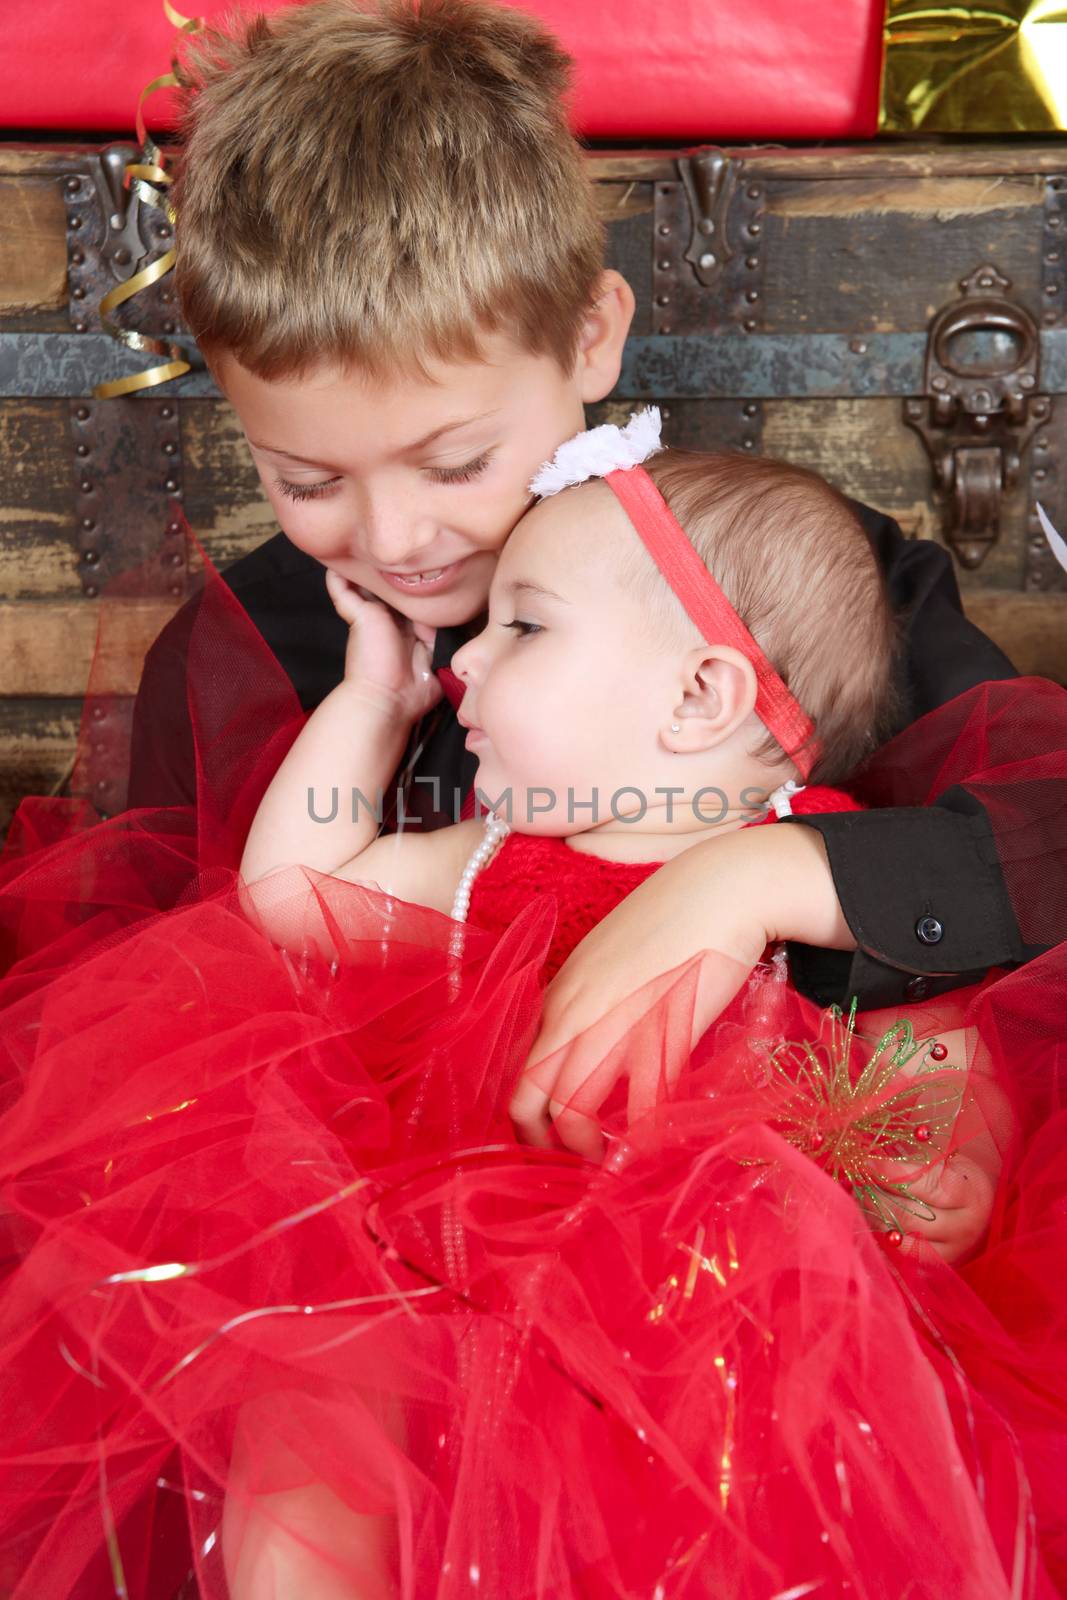 Young boy with his baby sister at christmas time